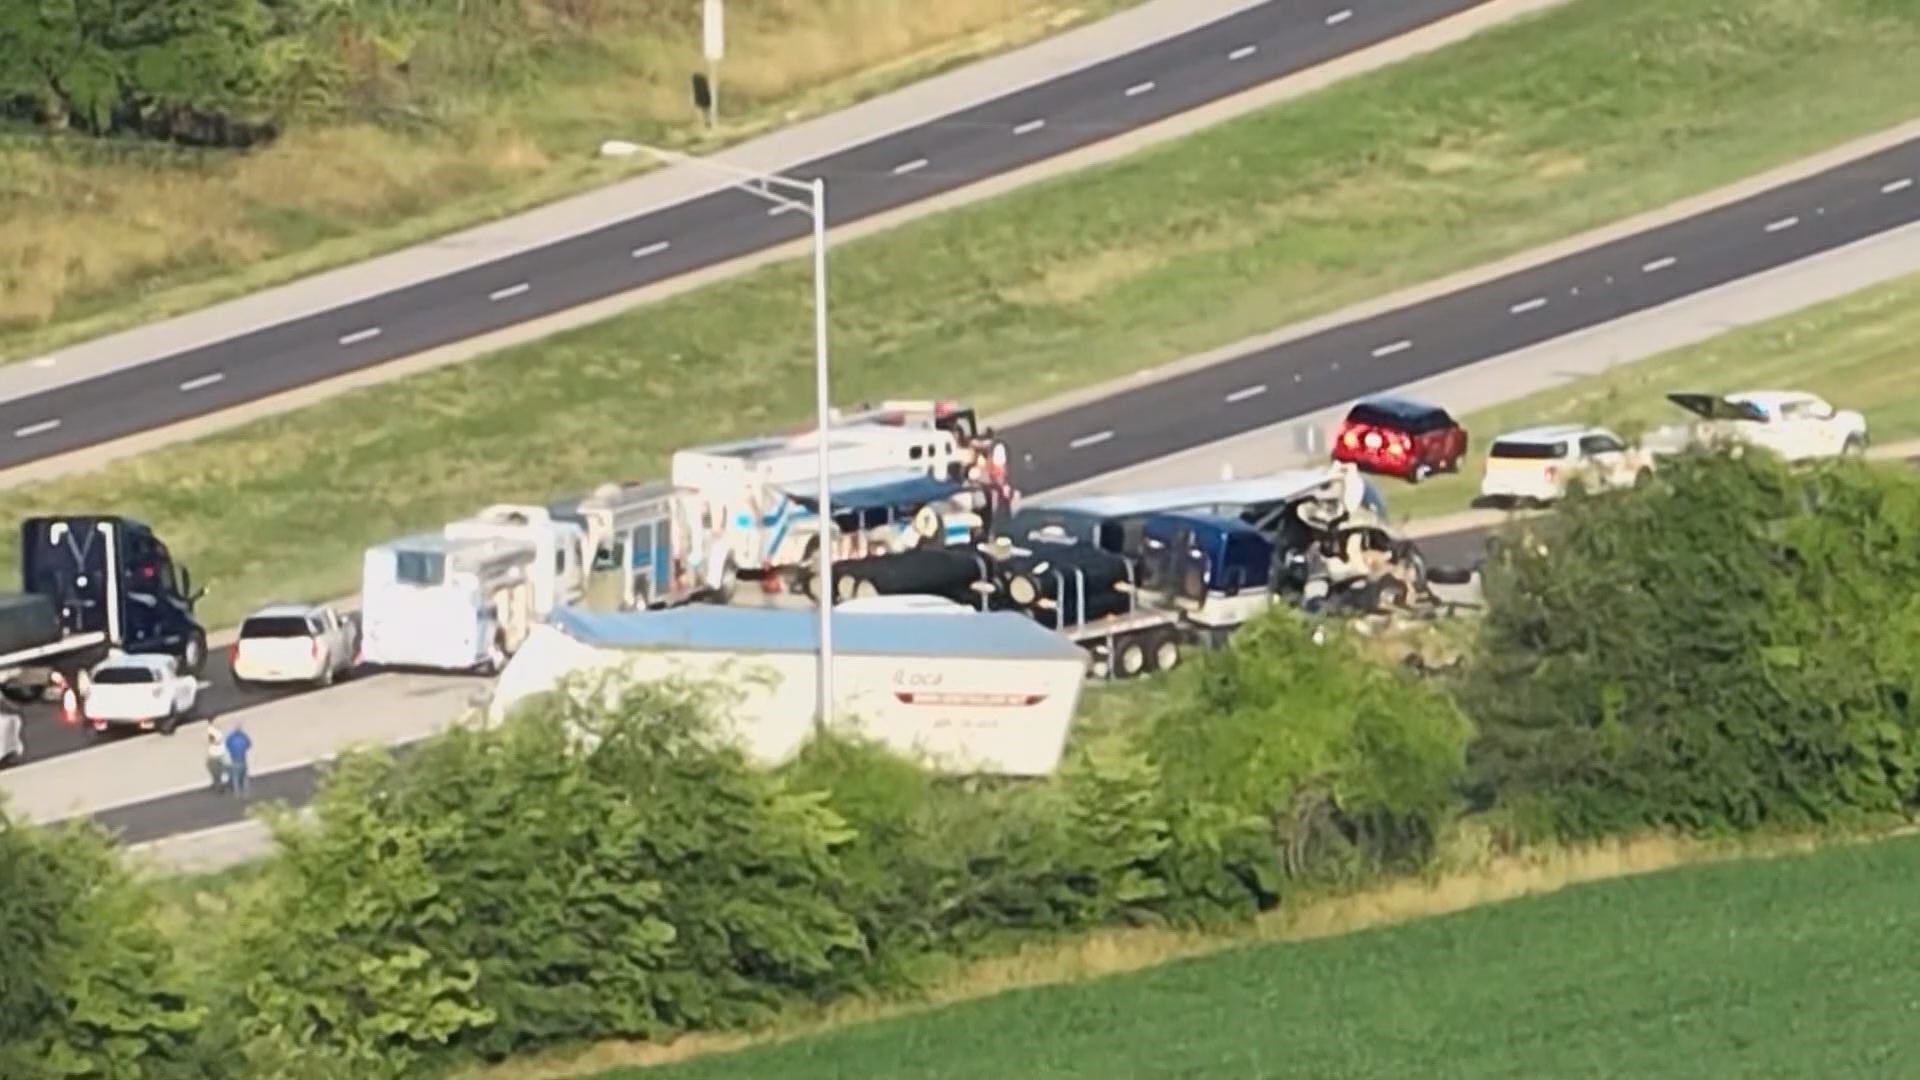 According to Illinois State Police, a Greyhound bus was carrying passengers westbound on I-70 when it struck three commercial vehicles.